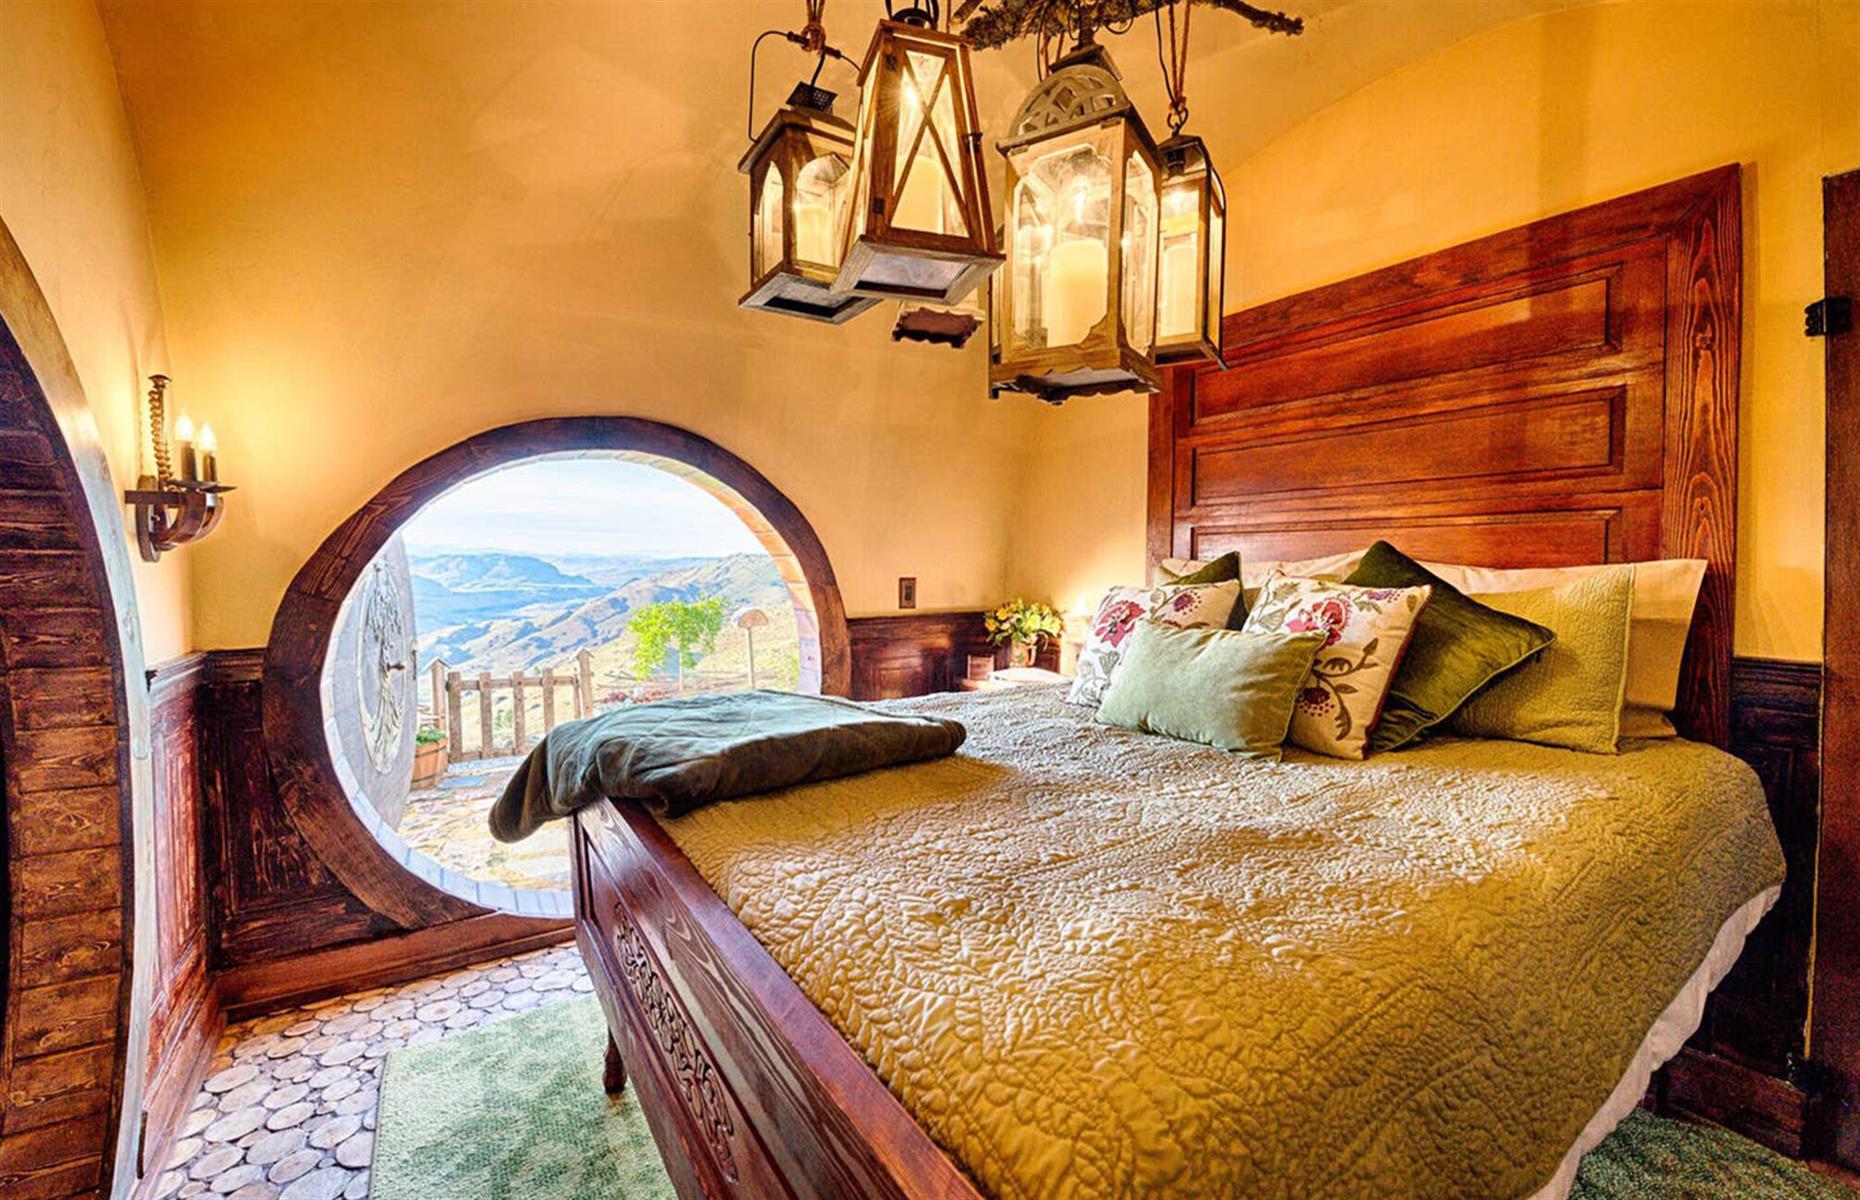 <p>This <a href="https://www.airbnb.co.uk/rooms/8794484"><em>Lord of the Rings</em>-inspired hobbit home</a> transports guests to the mythical Middle-earth. Nestled into a mountainside in central Washington, the one-bedroom home has a round doorway that opens up to incredible mountain scenery where the only neighbors are local wildlife like deer, rabbits and grouse. Find <a href="http://www.loveexploring.com/galleries/105912/amazing-airbnbs-featured-in-films-and-tv-series">amazing Airbnbs that have been featured in movies and TV shows</a>.</p>